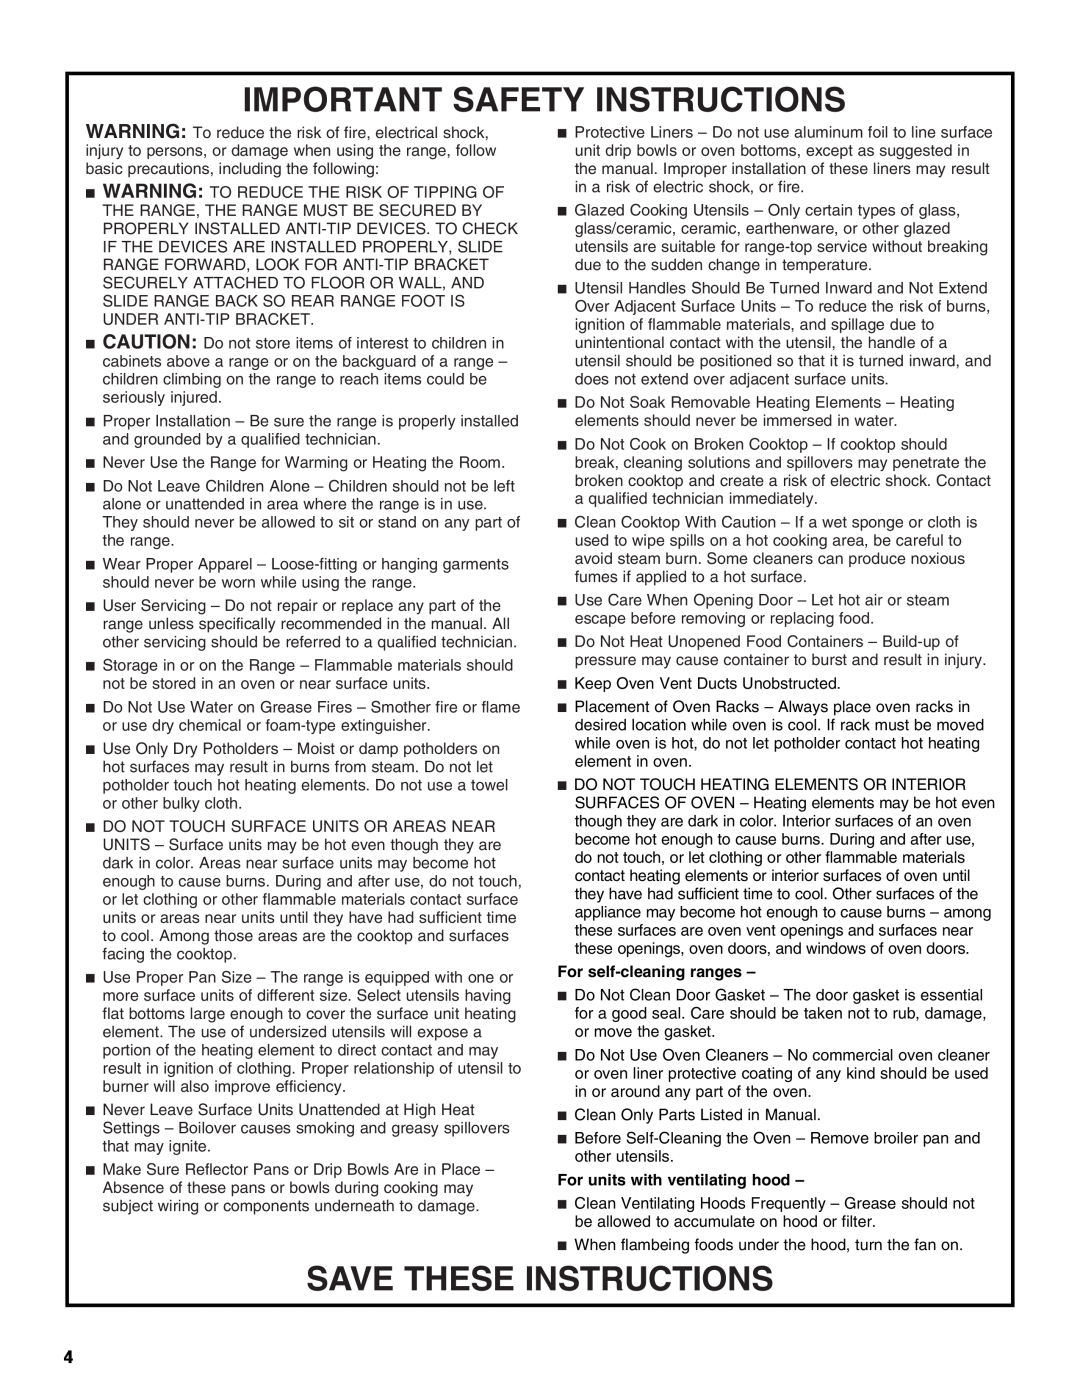 Jenn-Air JES9900, JES9800 manual Important Safety Instructions, Save These Instructions, For self-cleaning ranges 